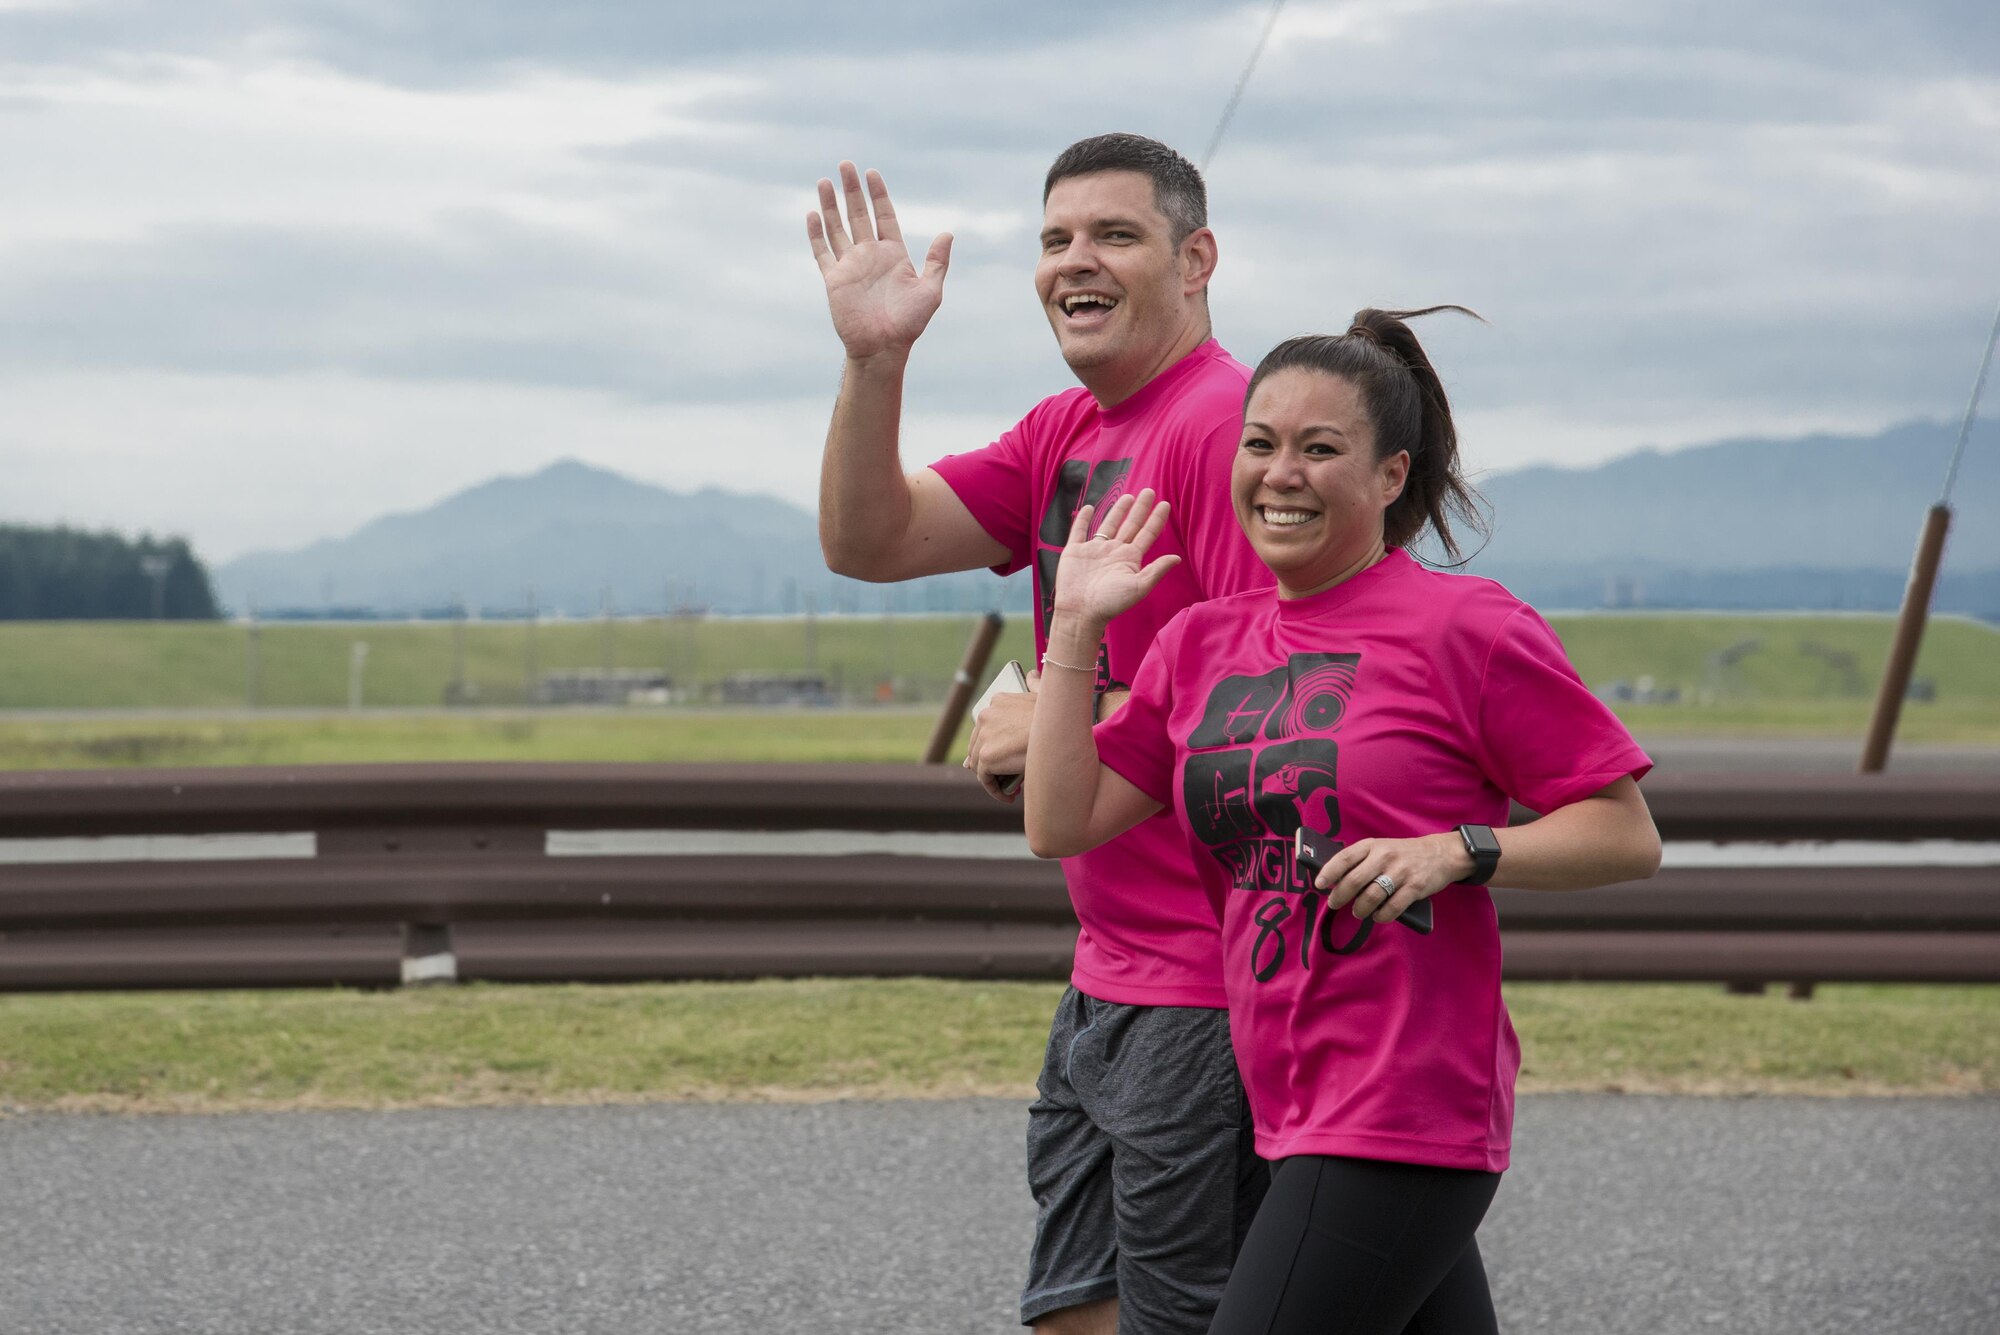 Participants wave their hands while running during the Breast Cancer Awareness Month 5K run at Yokota Air Base, Japan, Oct. 06, 2017.